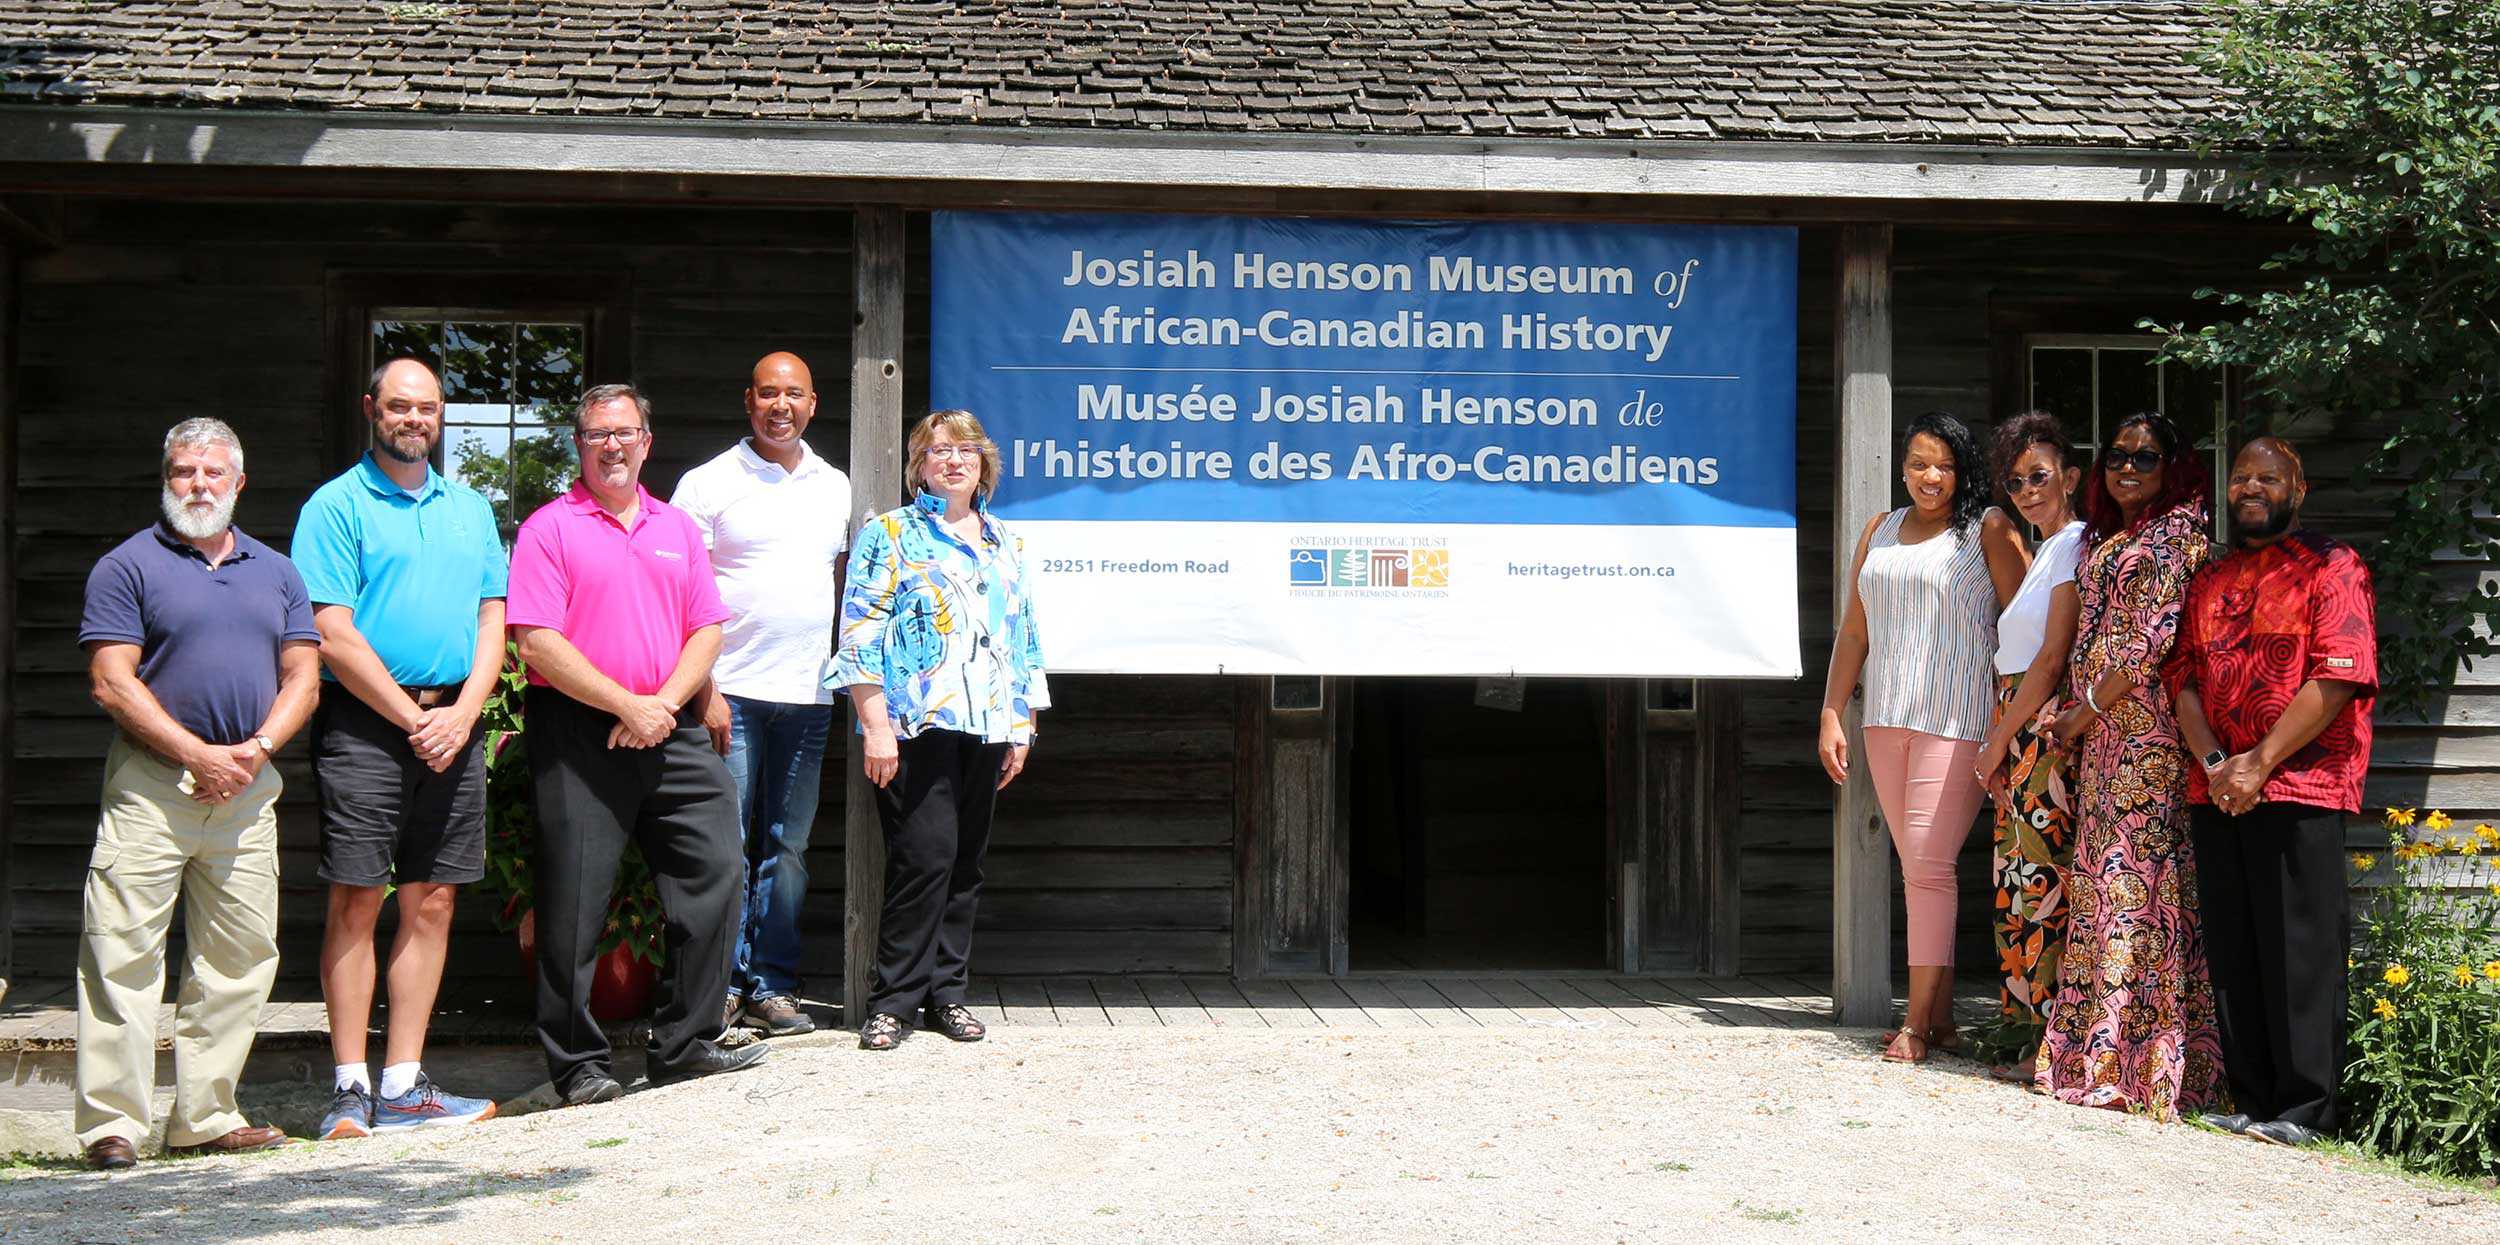 Unveiling of the new name for the Josiah Henson Museum of African-Canadian History on July 30, 2022.